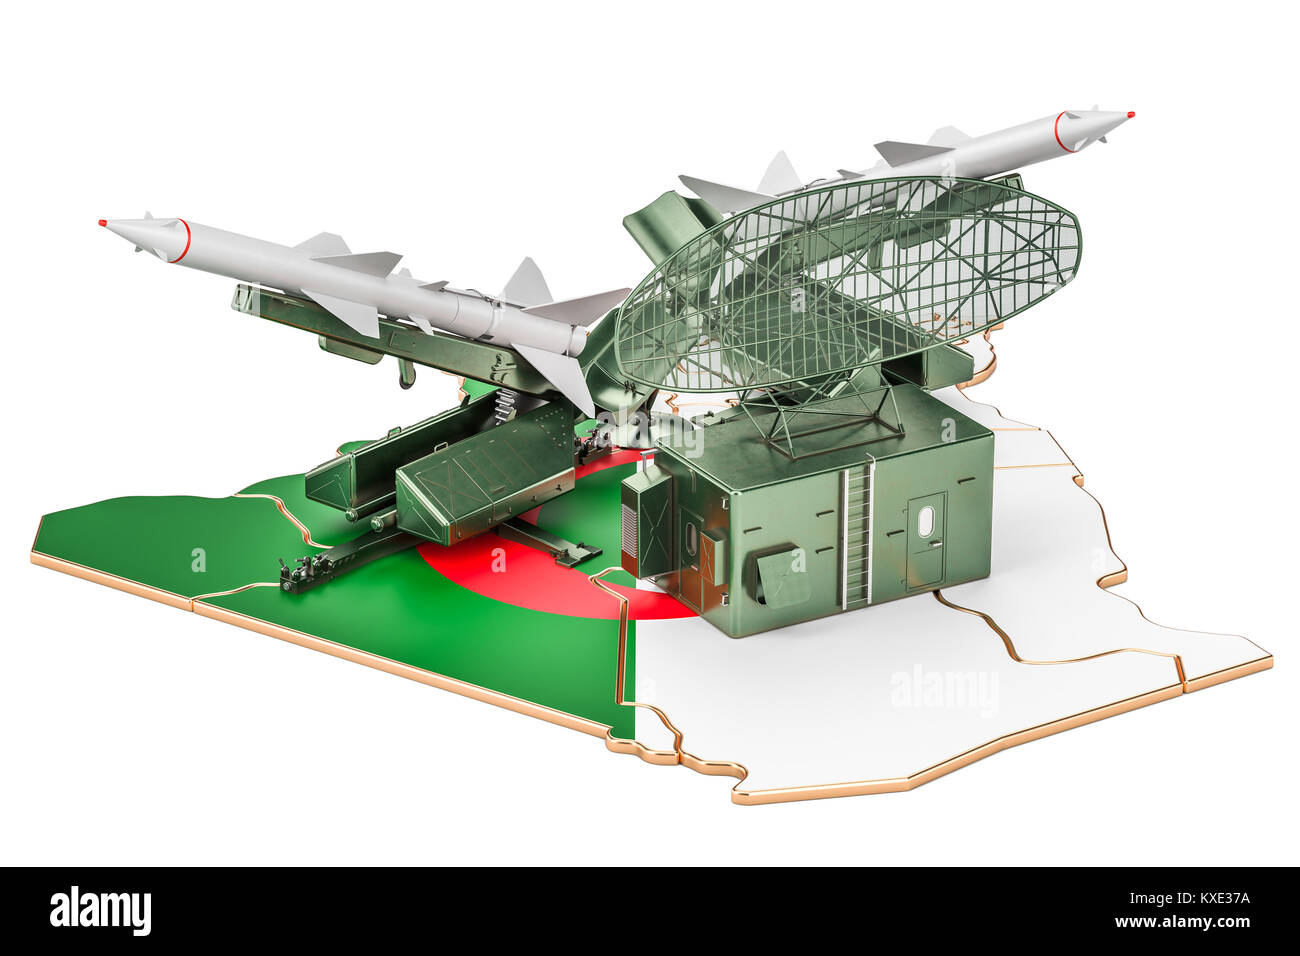 Algerian missile defence system concept, 3D rendering Stock Photo